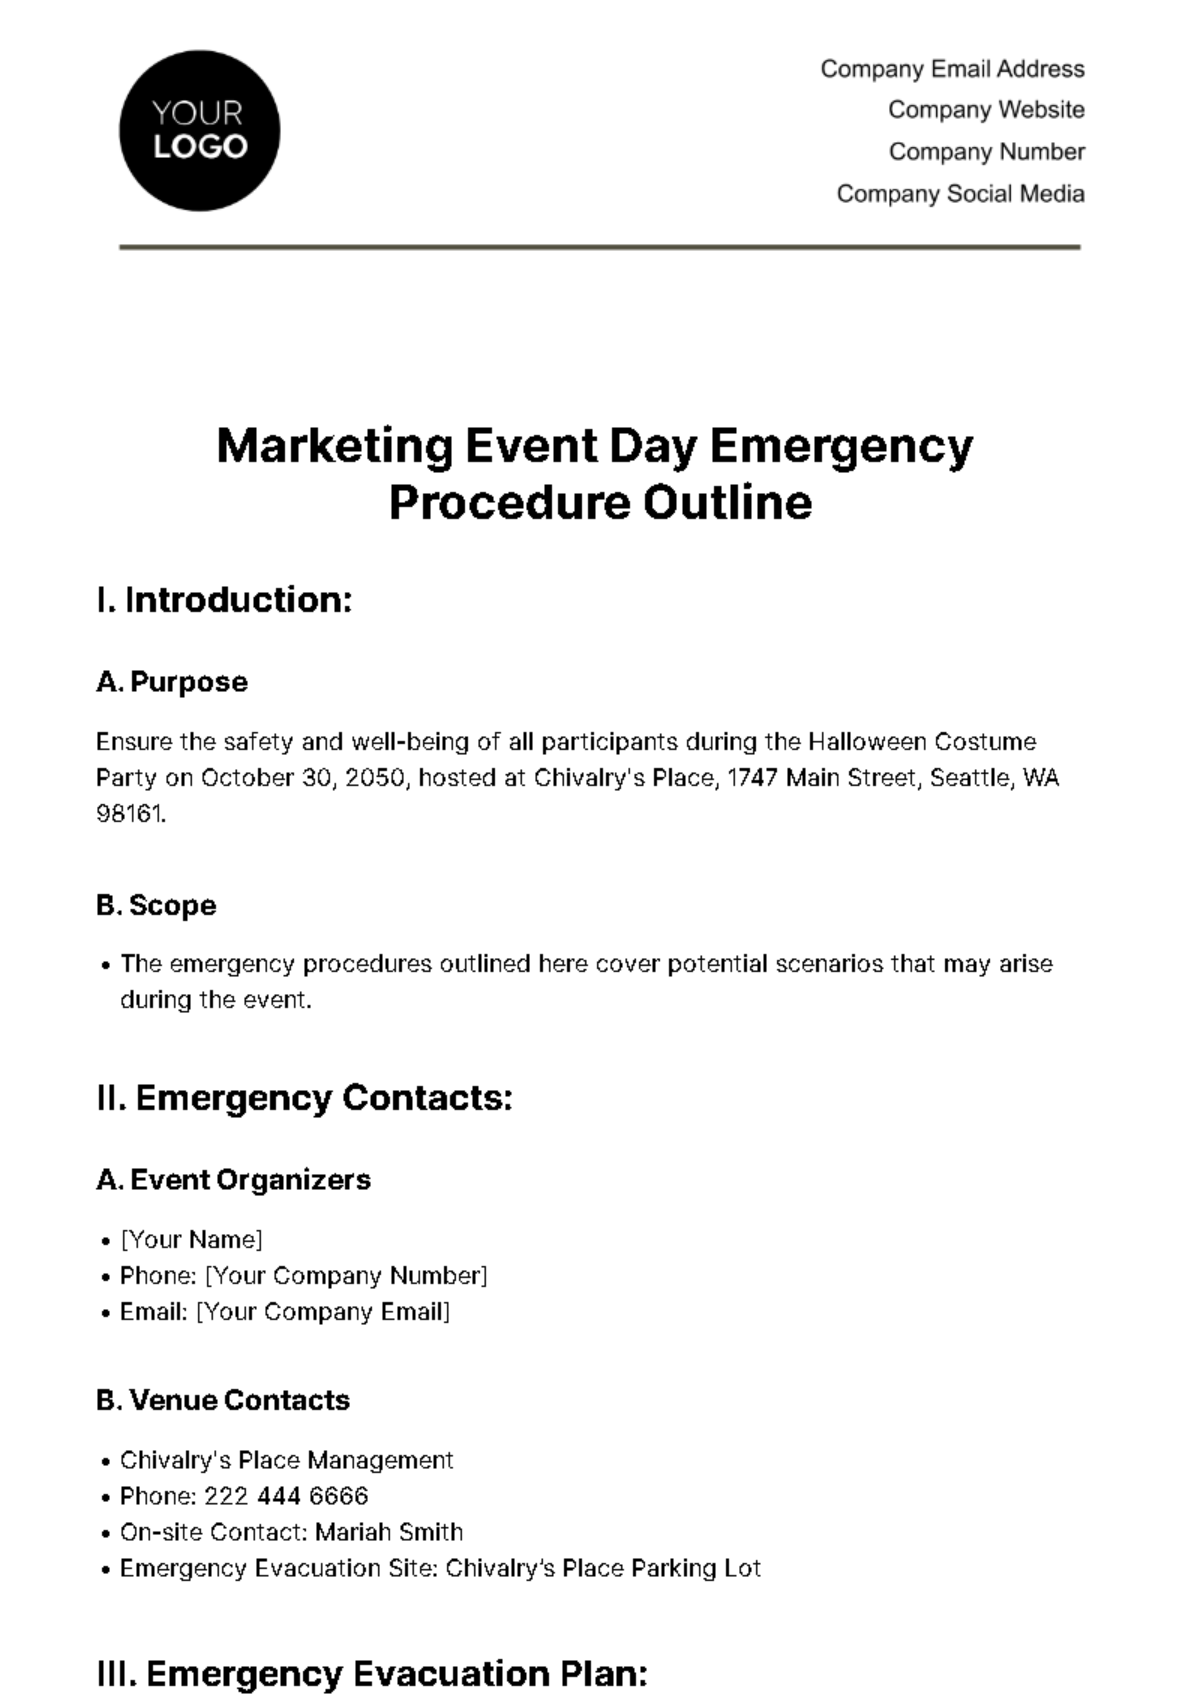 Marketing Event Day Emergency Procedure Outline Template